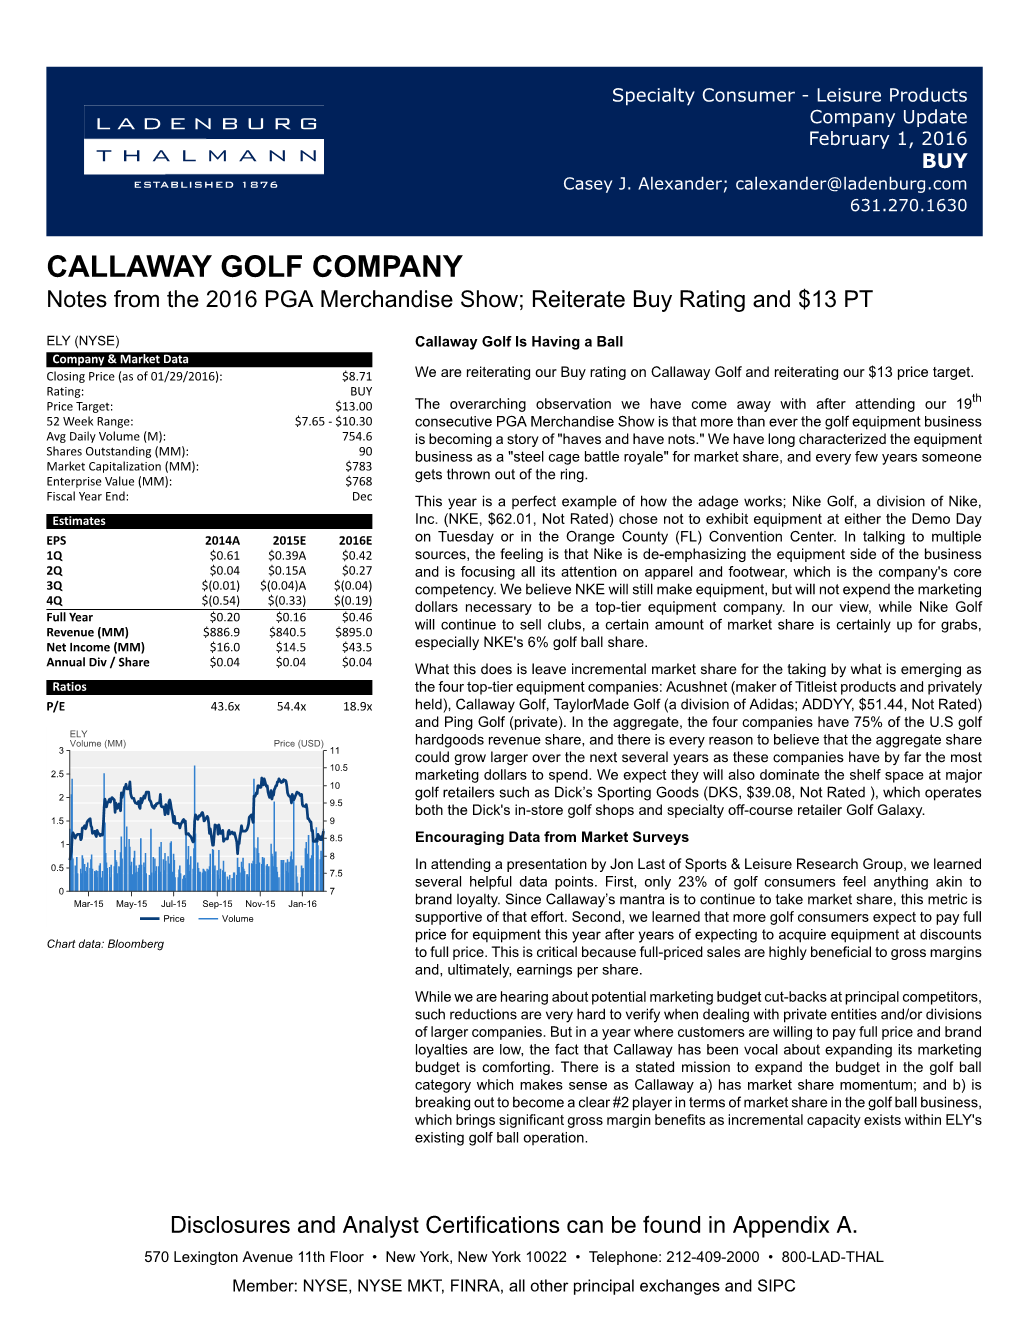 CALLAWAY GOLF COMPANY Notes from the 2016 PGA Merchandise Show; Reiterate Buy Rating and $13 PT